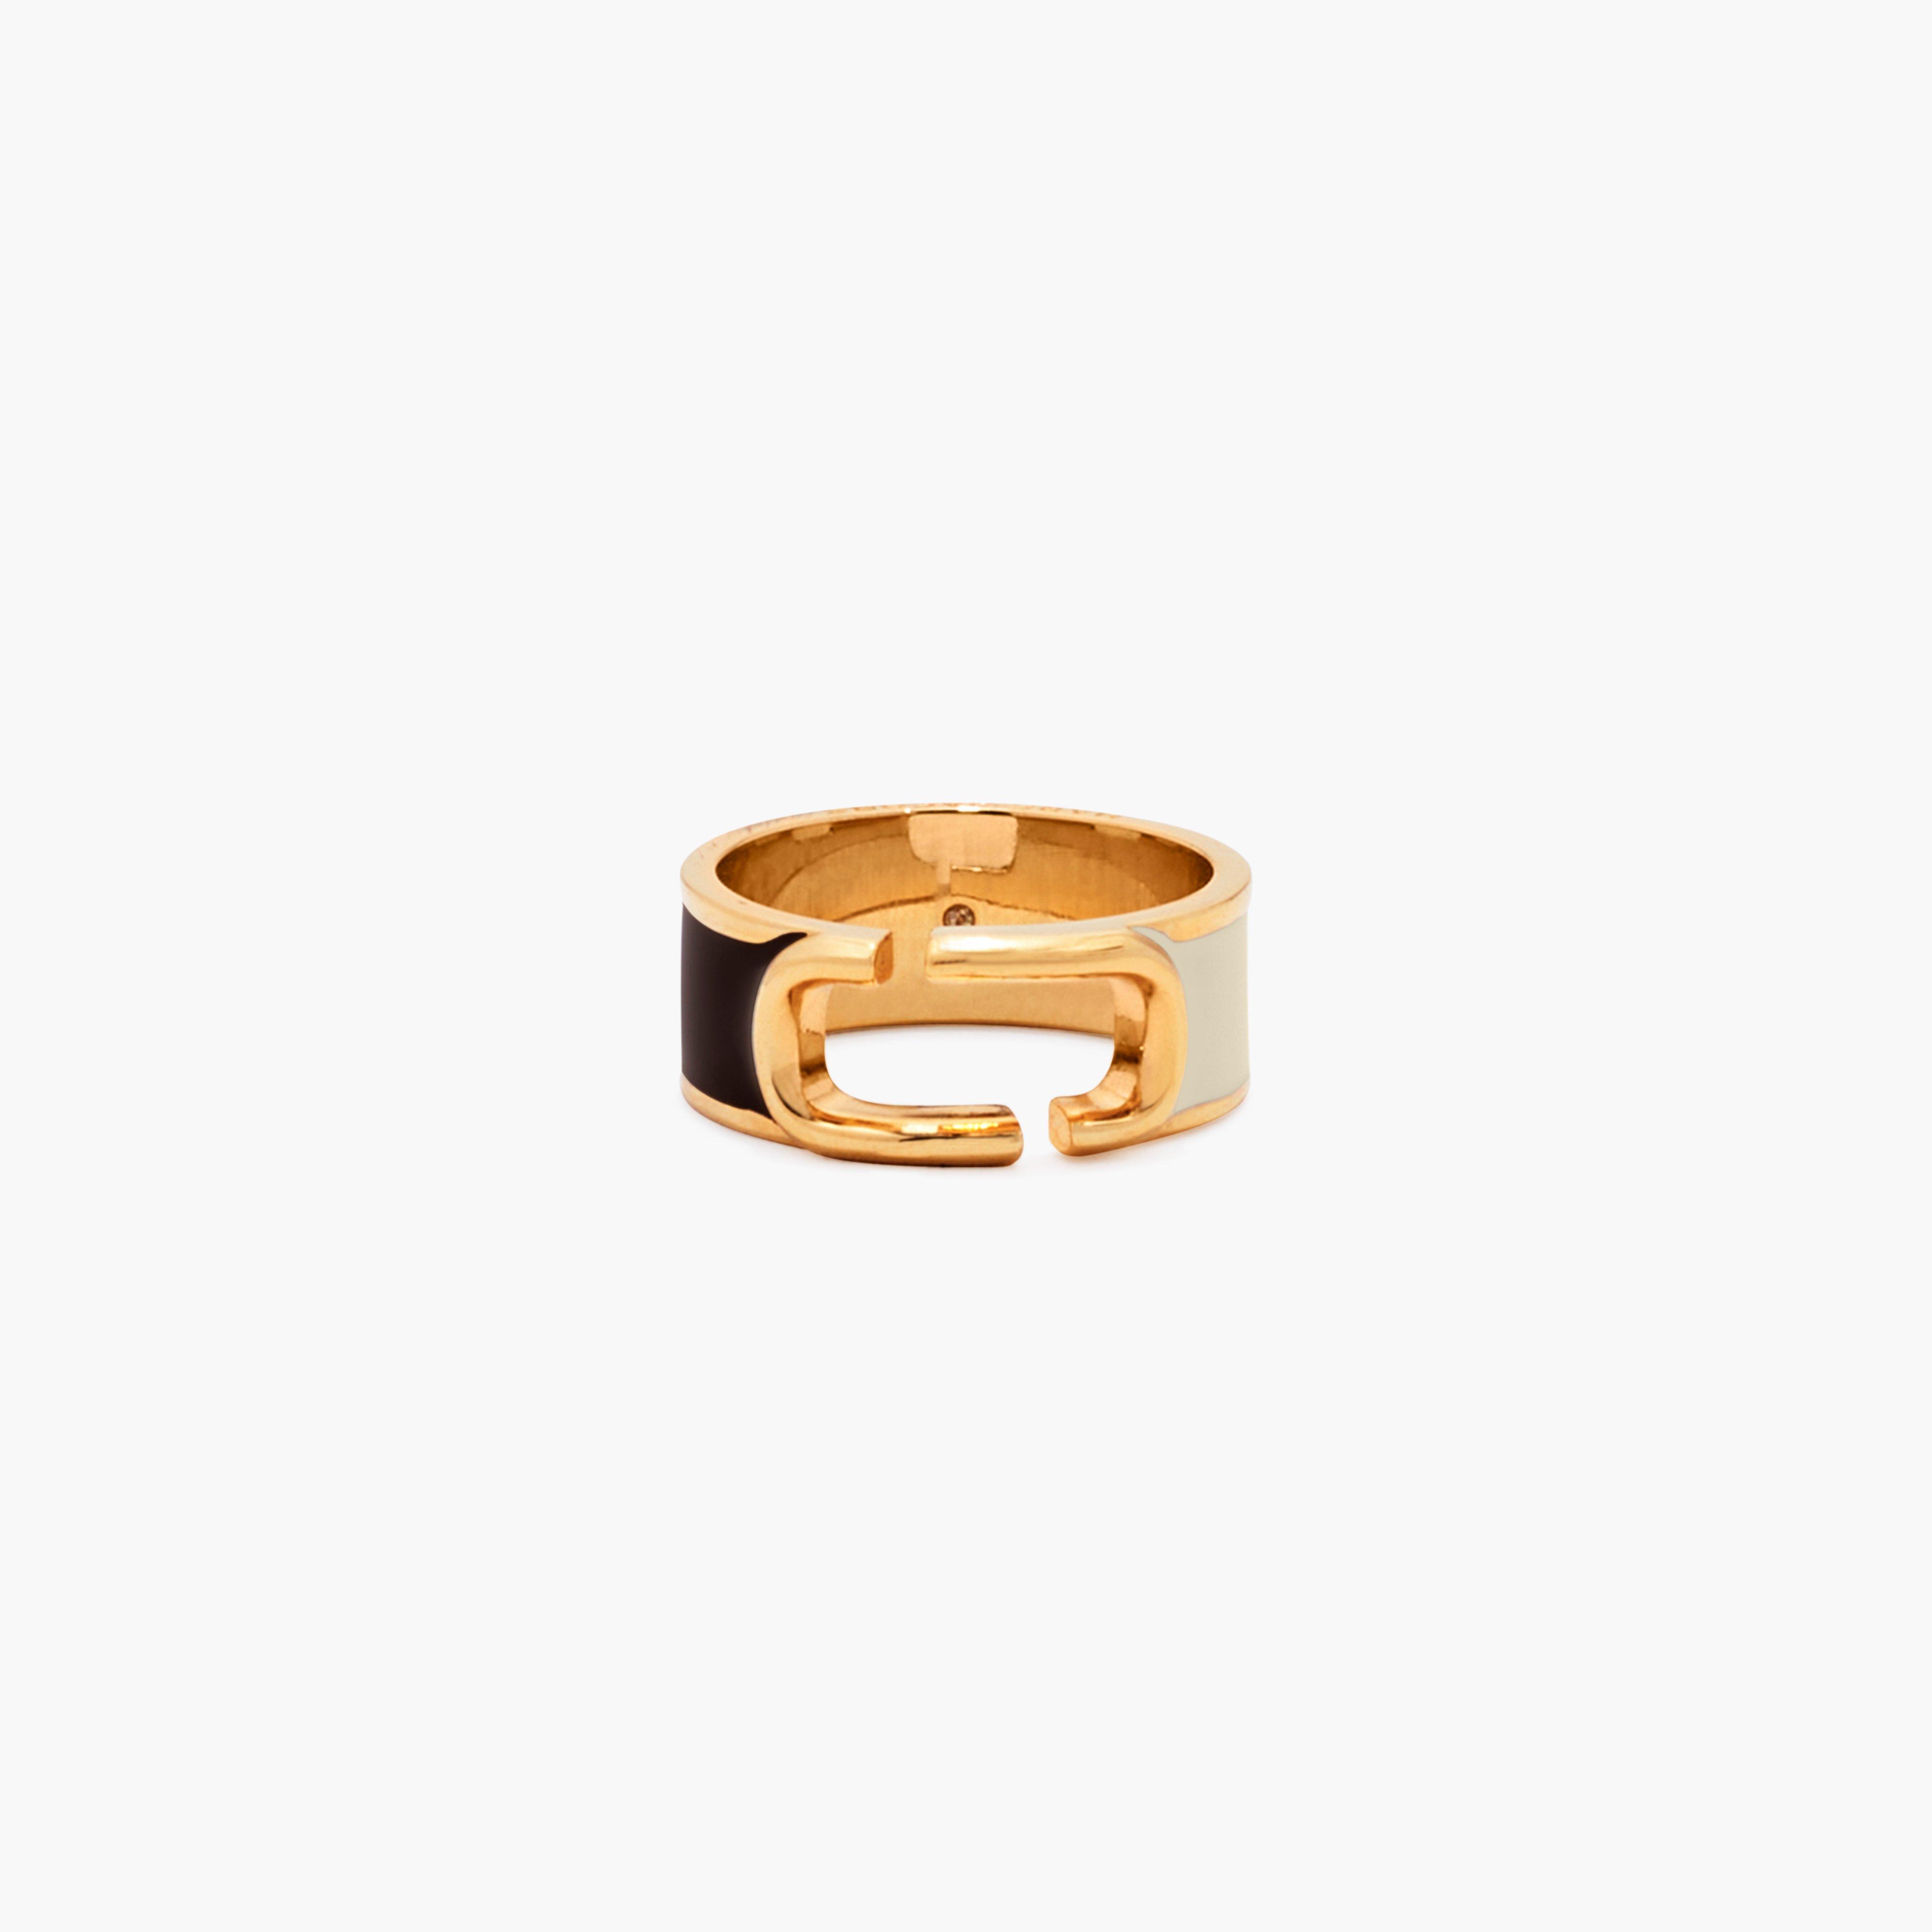 Marc by Marc jacobs The J Marc Colorblock Ring,BLACK MULTI/GOLD